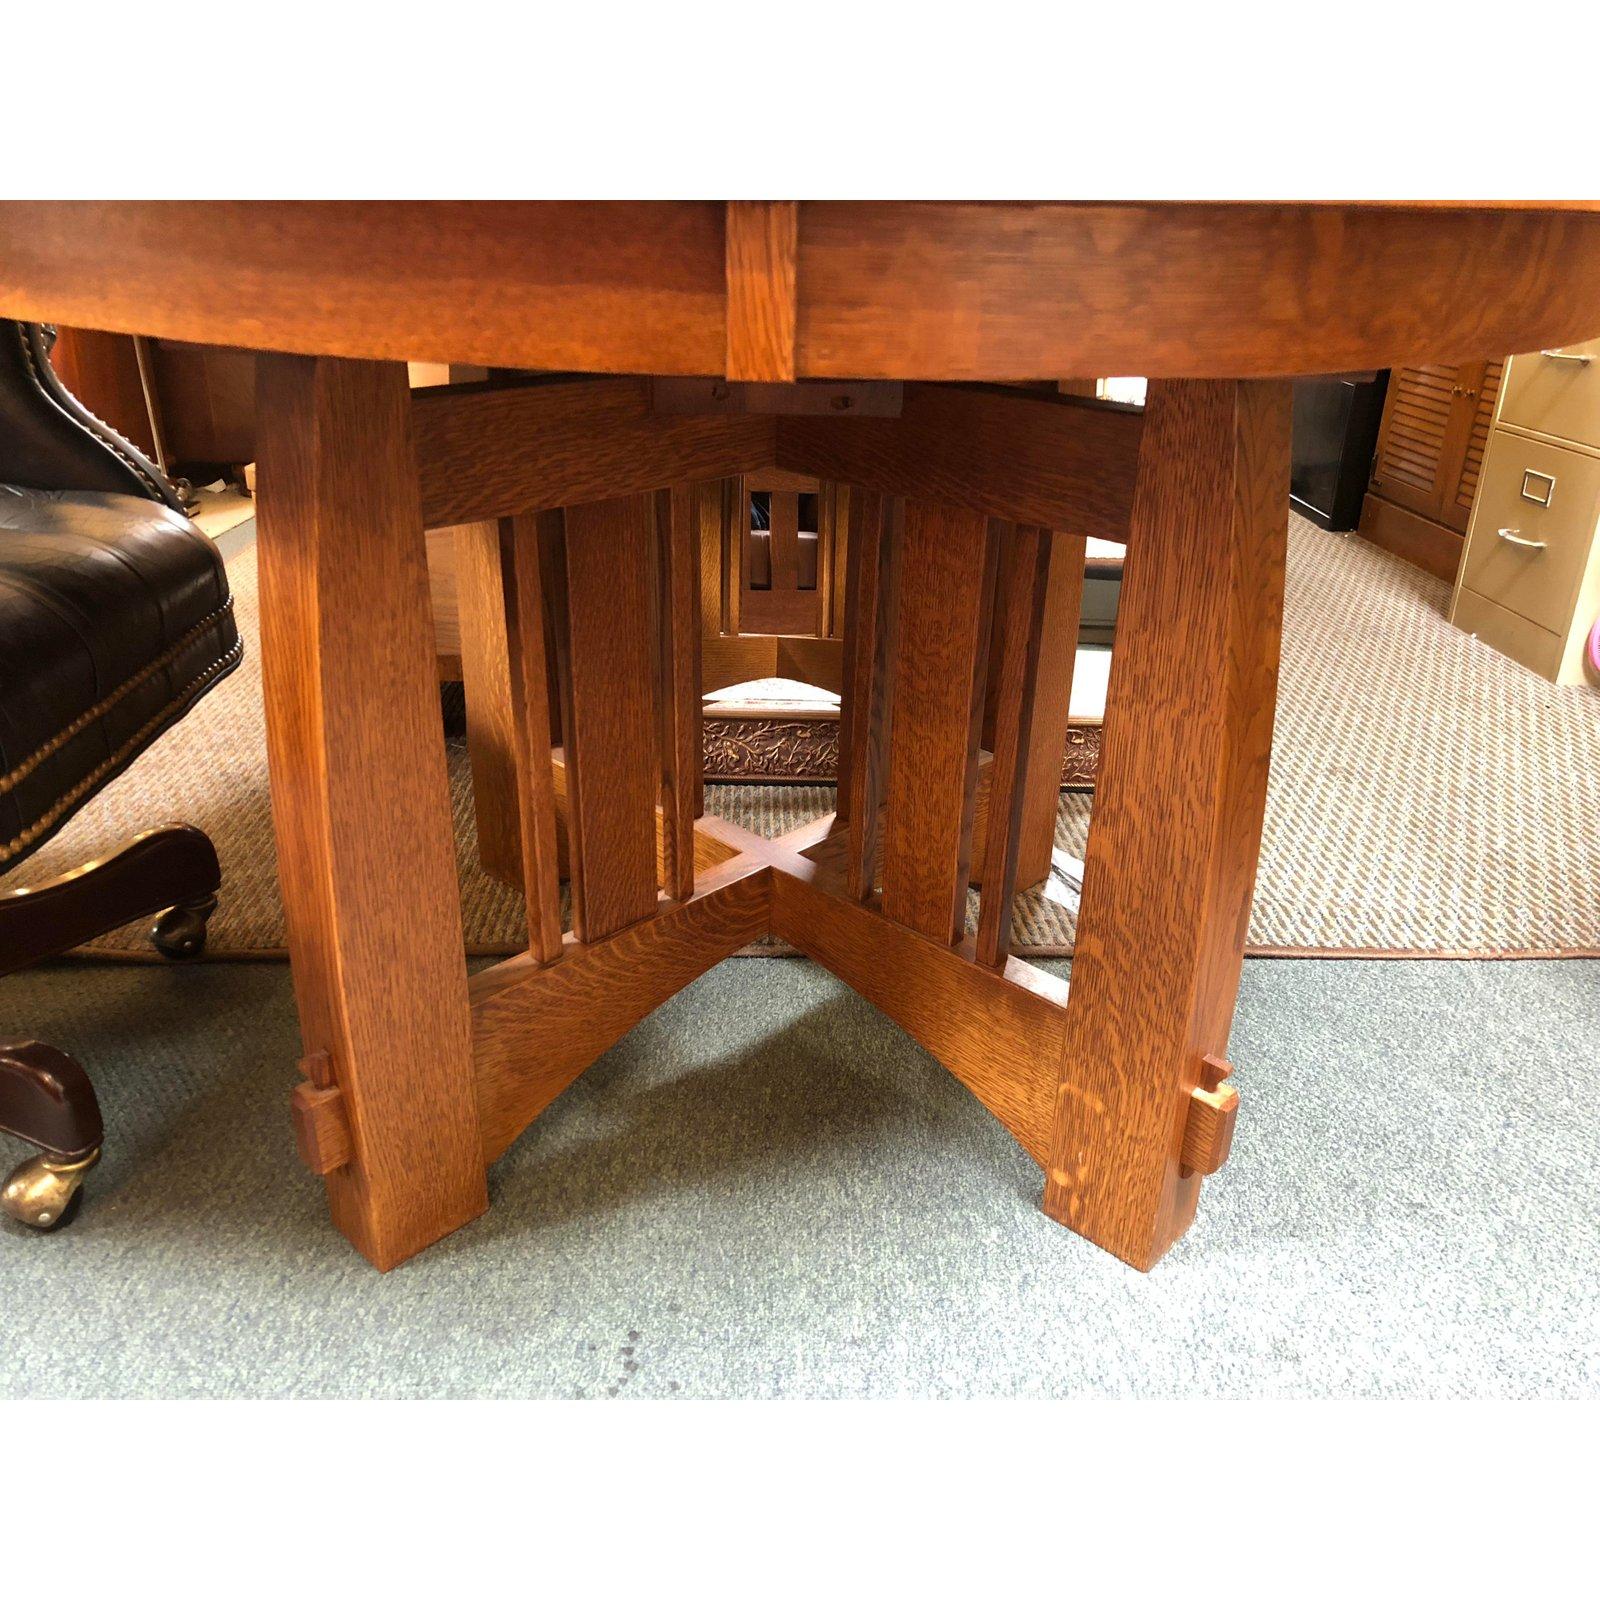 A Brookville Pub Table by West Point. Straight from a designer showroom. A handcrafted X shaped base design with a round top surface. The wood is a quarter sawn white oak. Comes with two extension leafs. Hand crafted in U.S.A. 
Extension